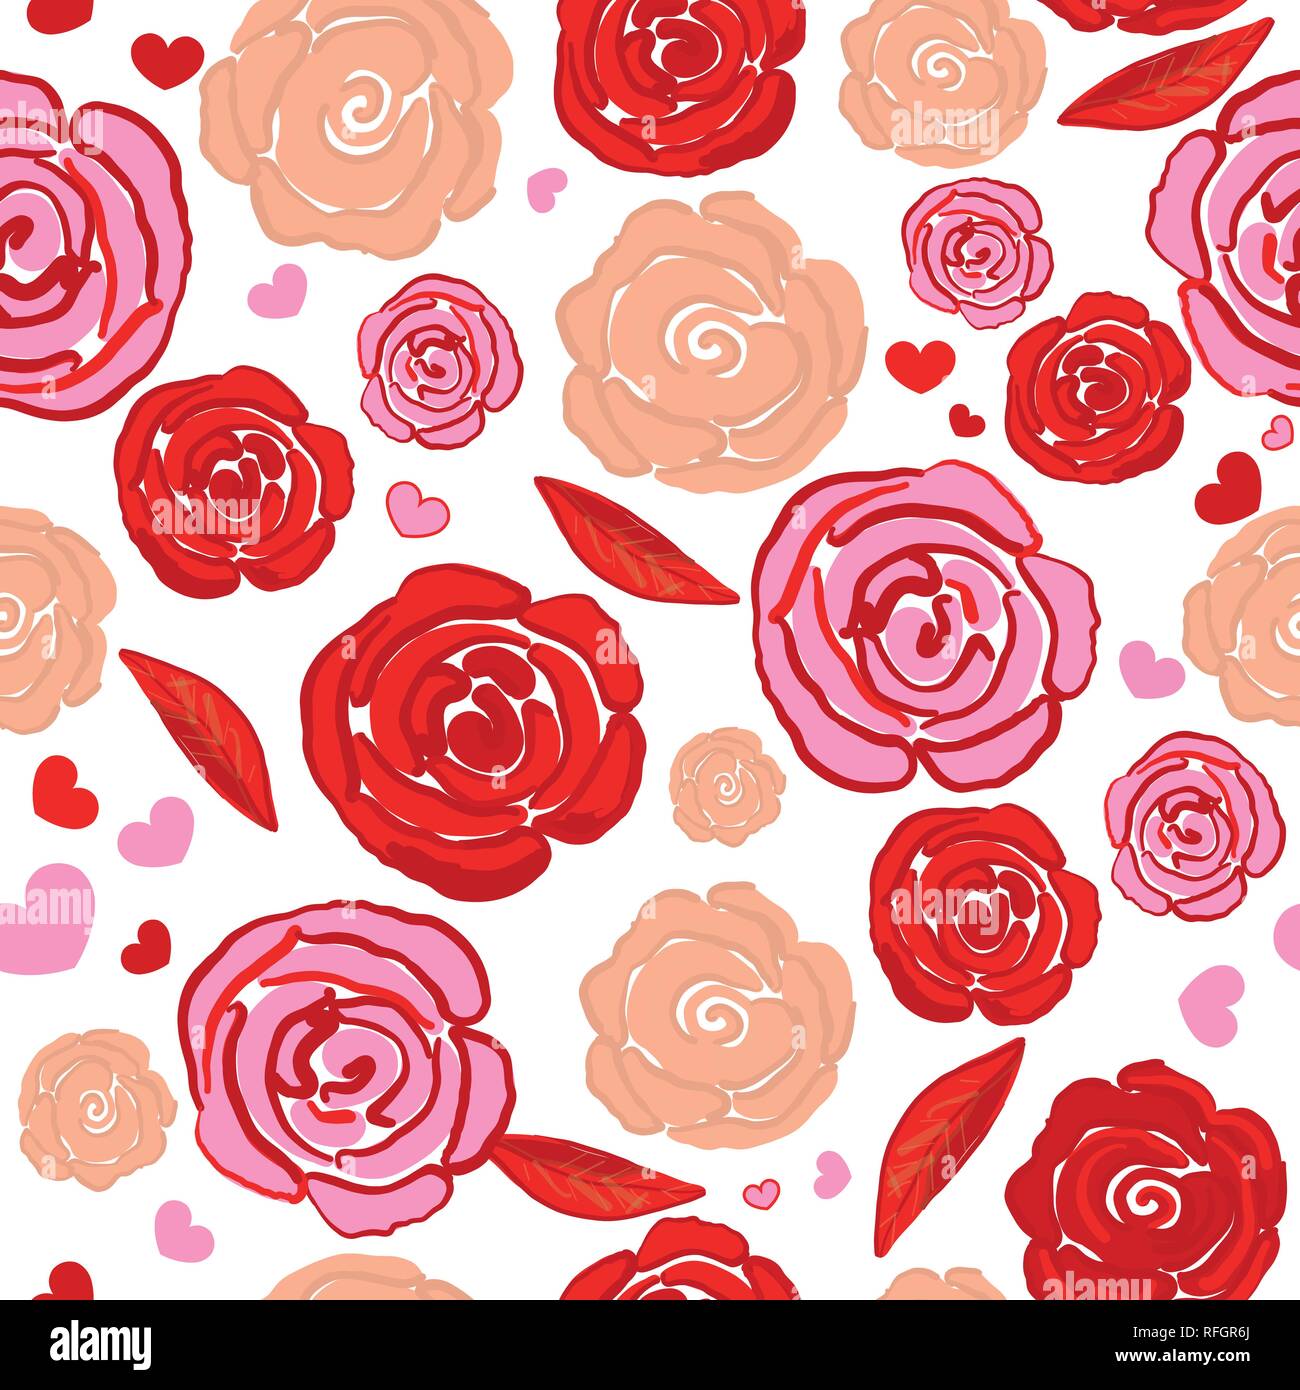 Pink red hand drawing roses cute repeated hearts pattern. Happy Valentine's day wallpaper background Stock Vector